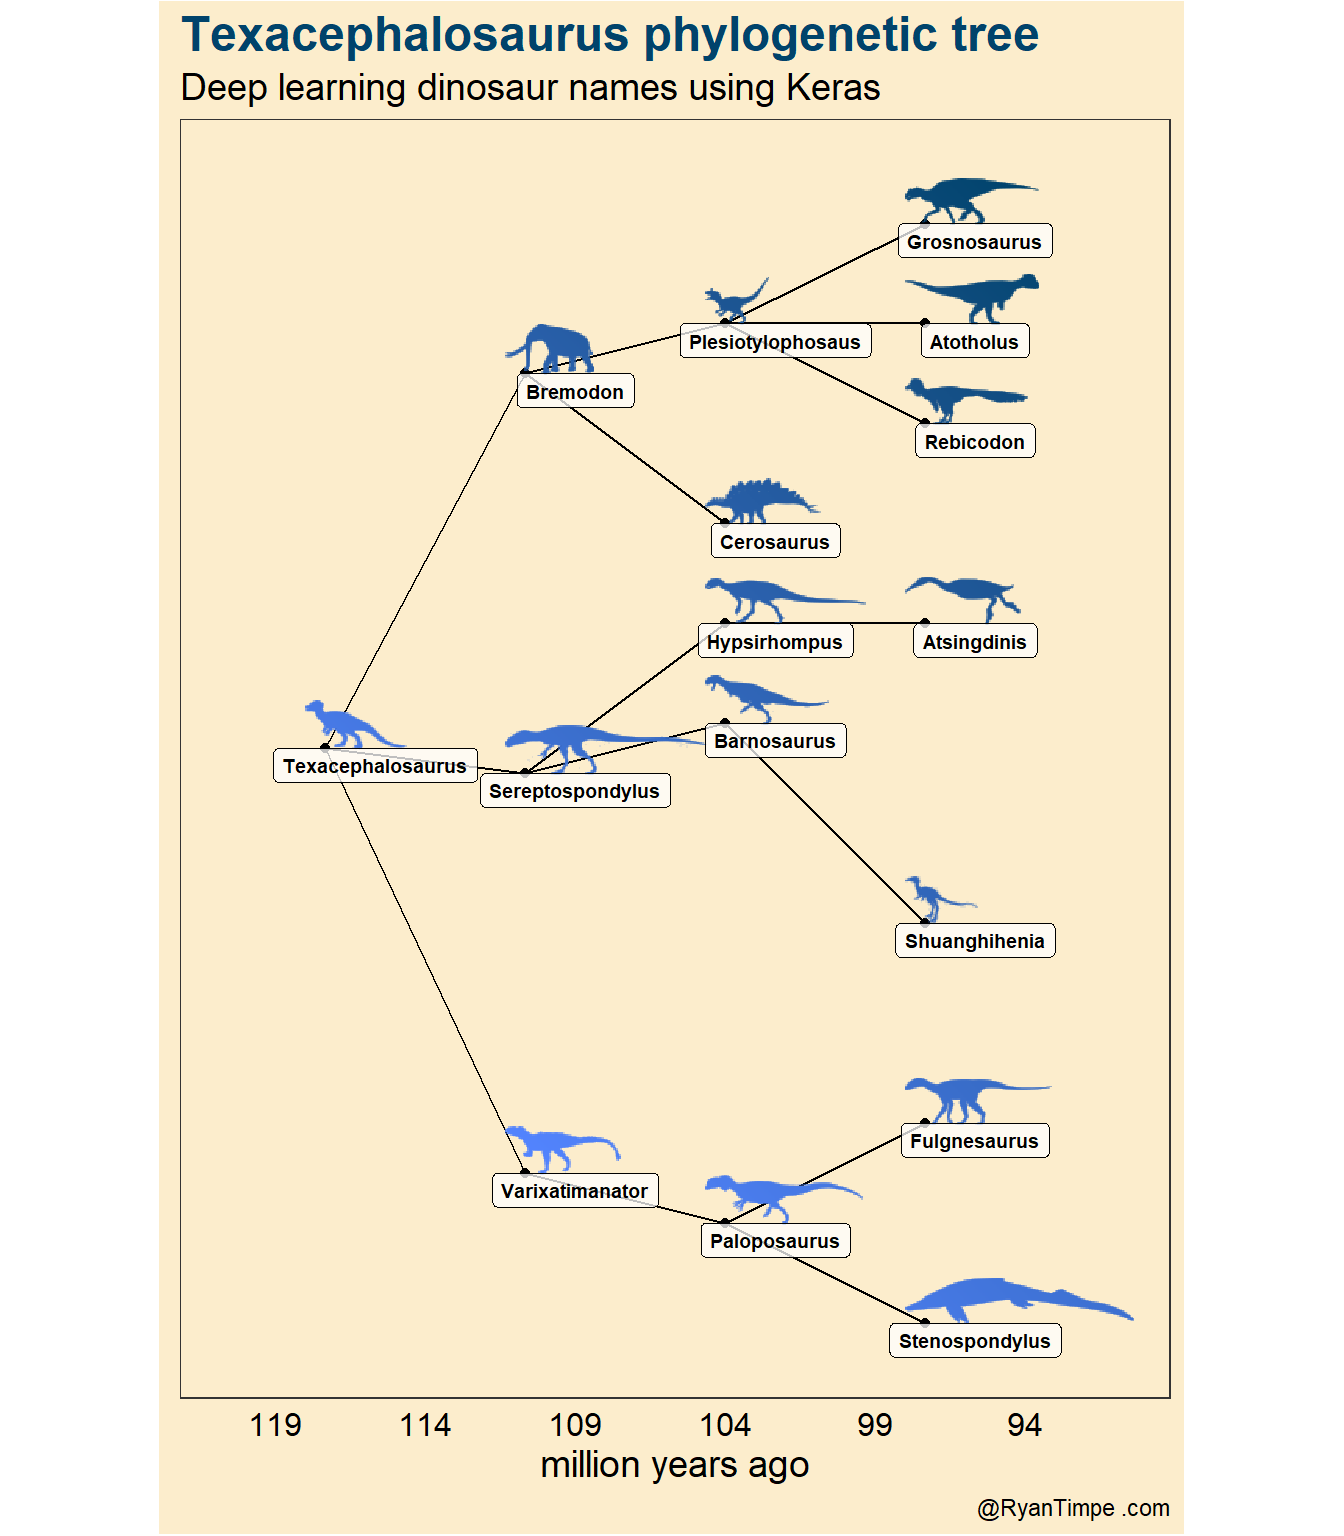 Example Kerasaur phylogeny by Ryan Timpe